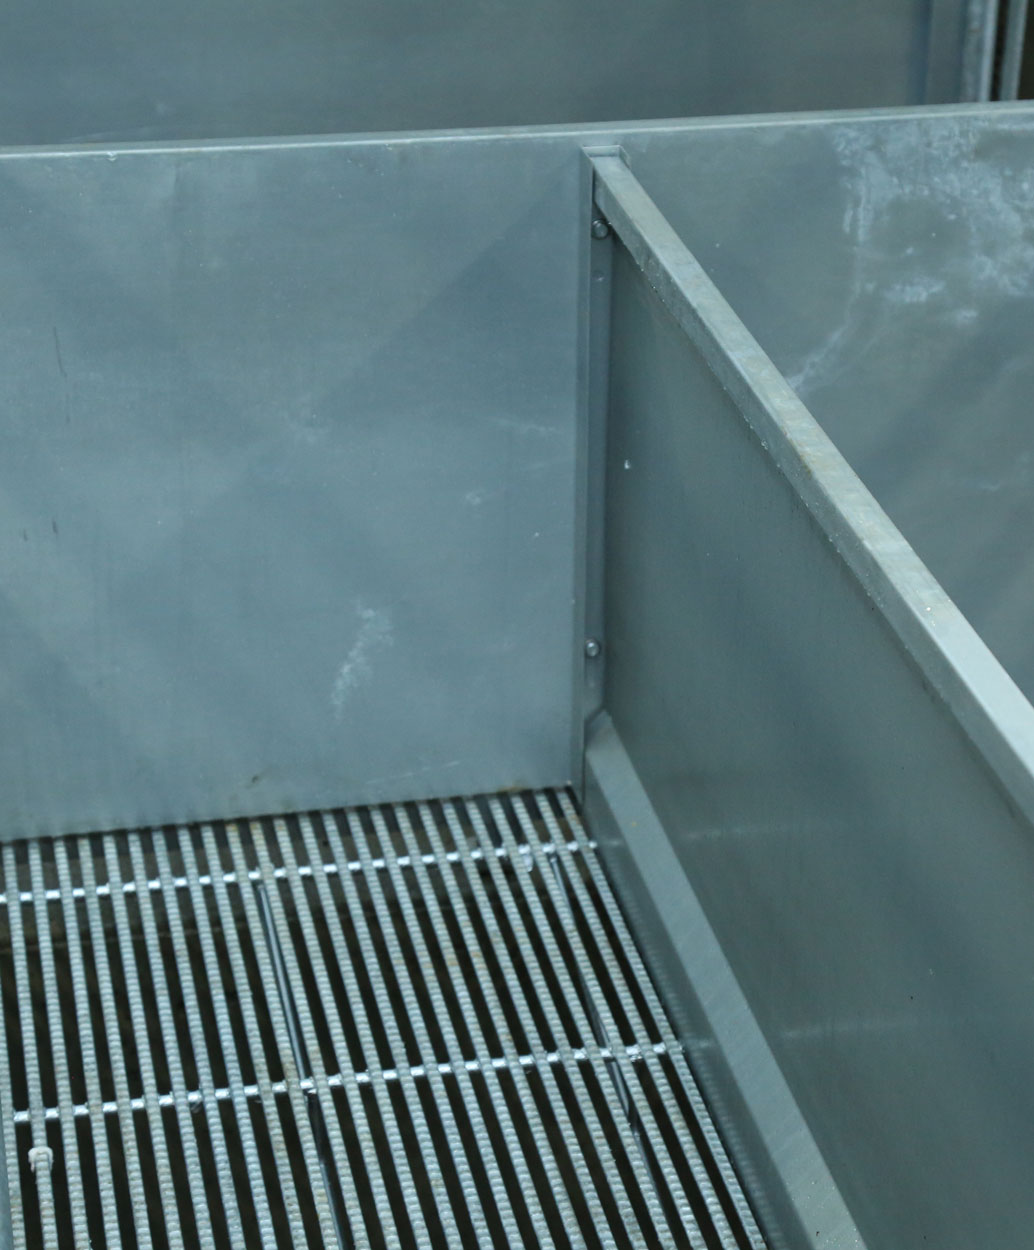 Hog Slat galvanized steel creep panels are manufactured of 16 gauge steel and available in many different length options. 21-7/8” standard height provides protection for pigs while still allowing easy access as needed for farrowing barn staff.